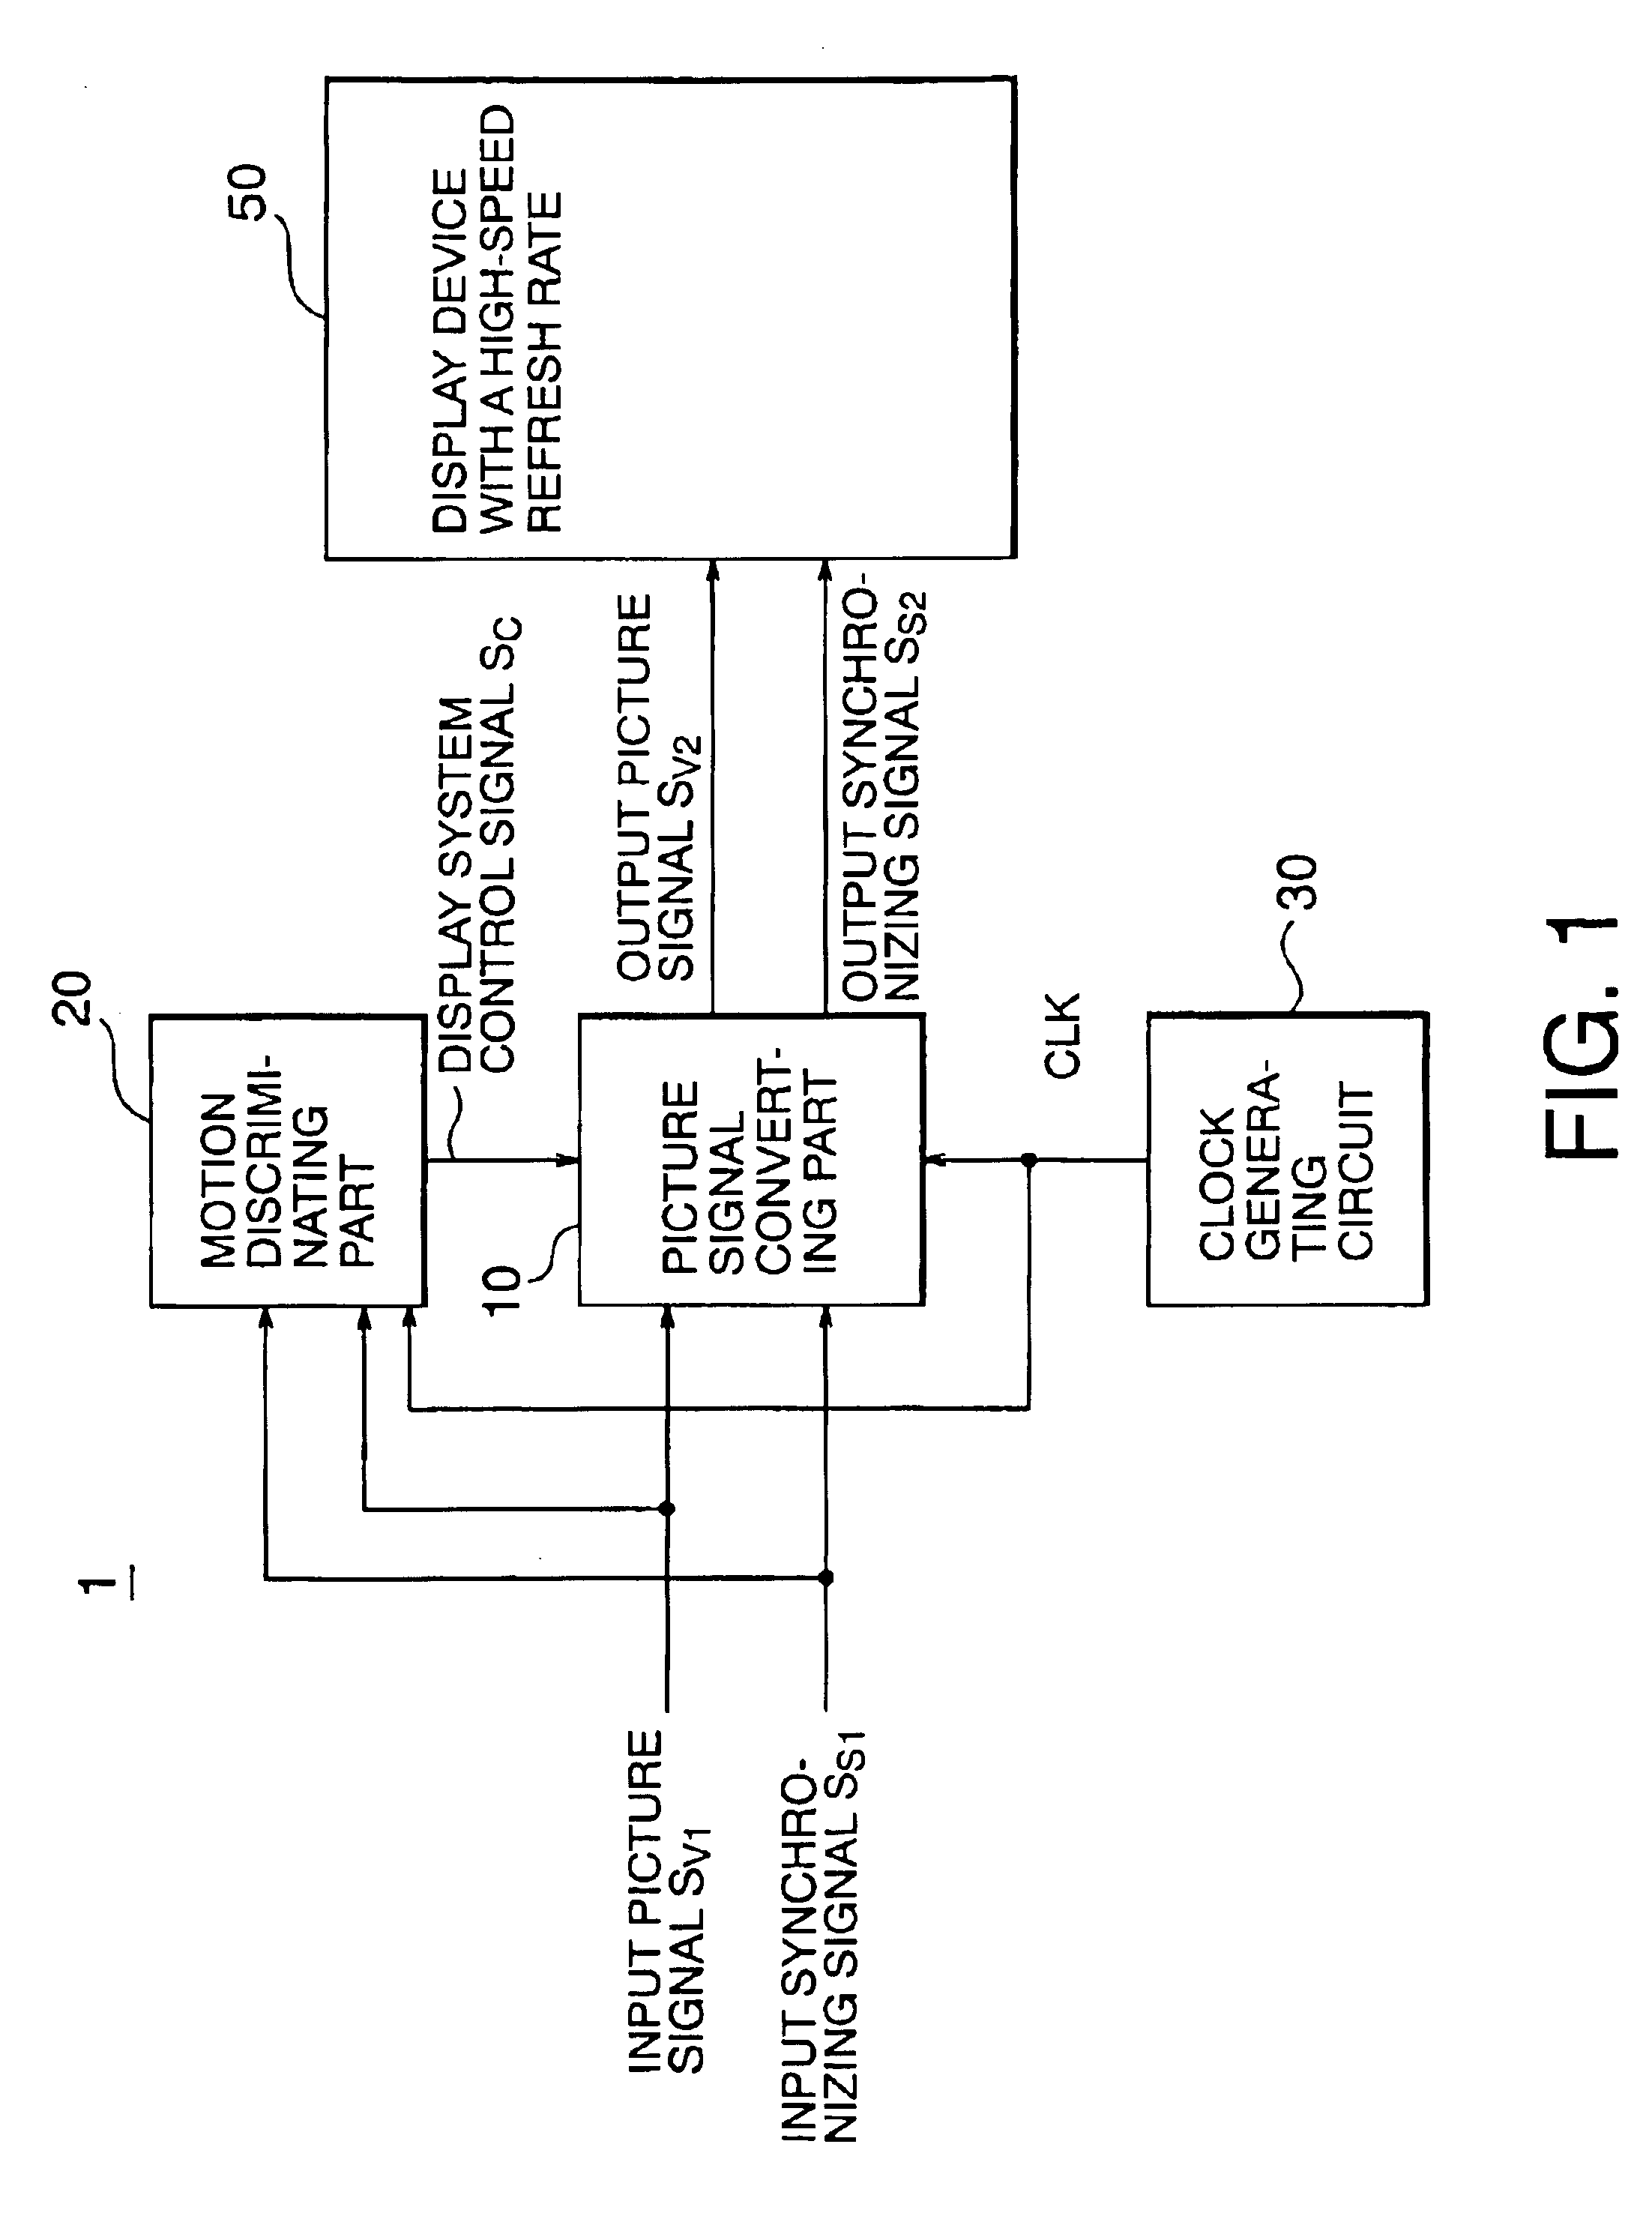 Image processing system and method, and image display system